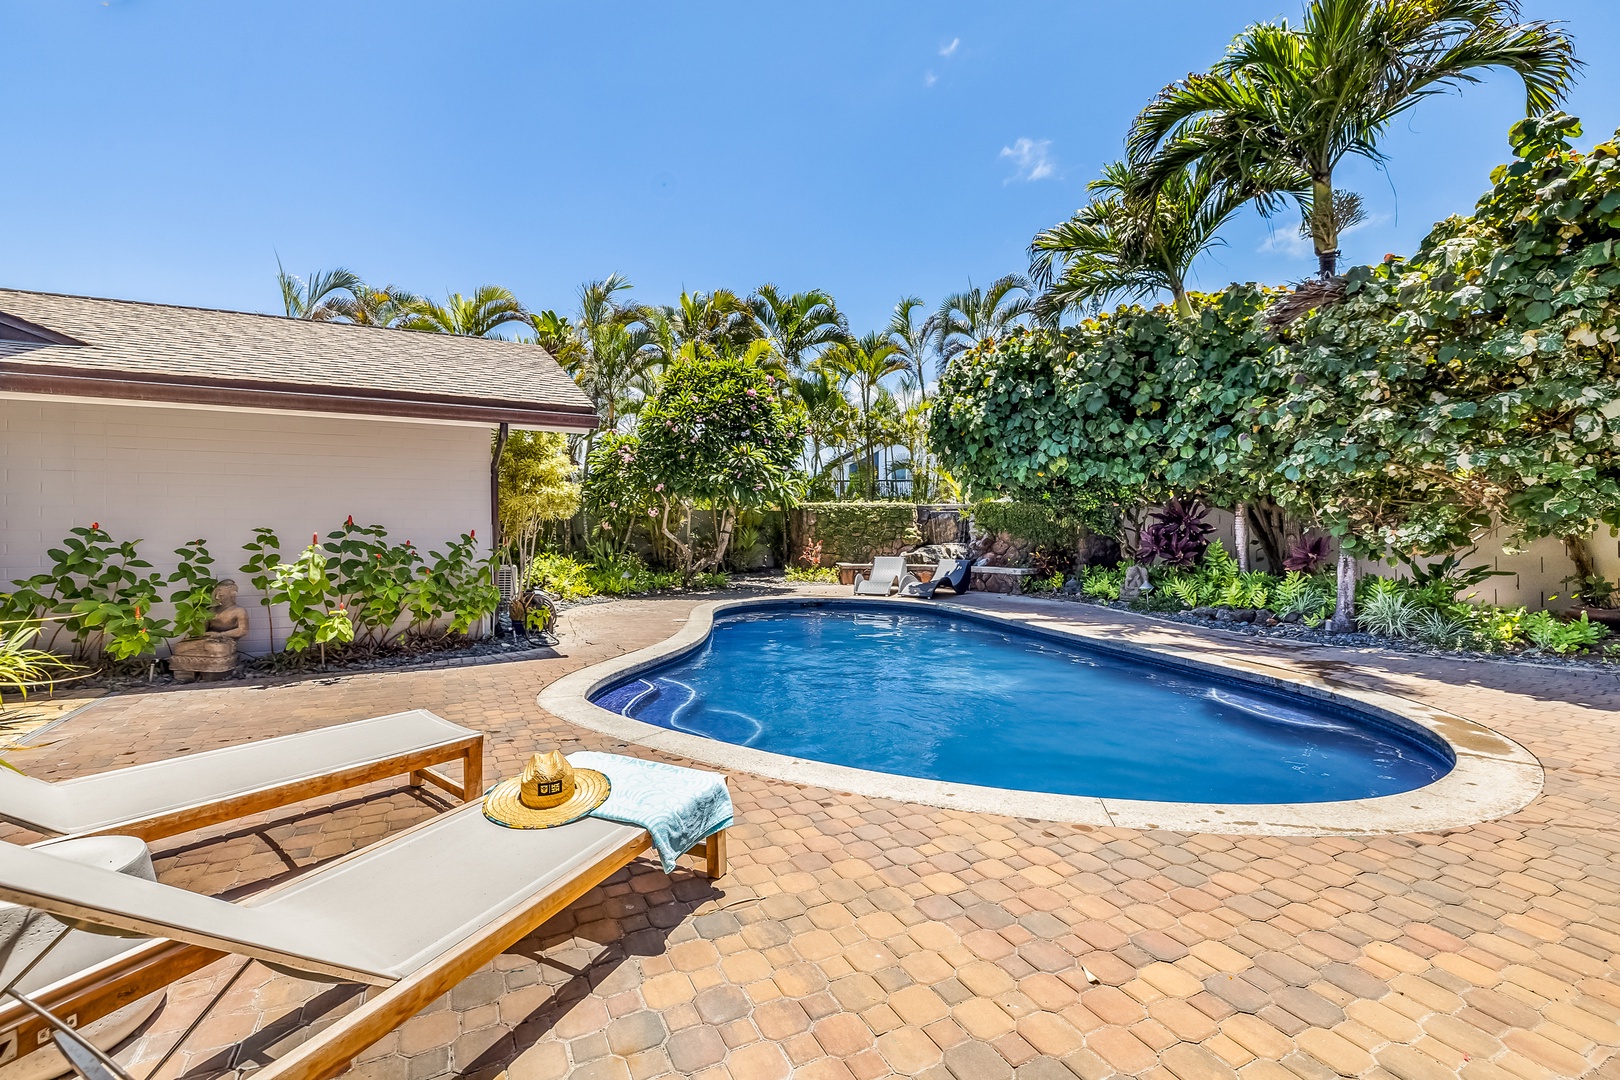 Kailua Vacation Rentals, Hale Ohana - Take a refreshing dip in your private pool or soak up the sun poolside